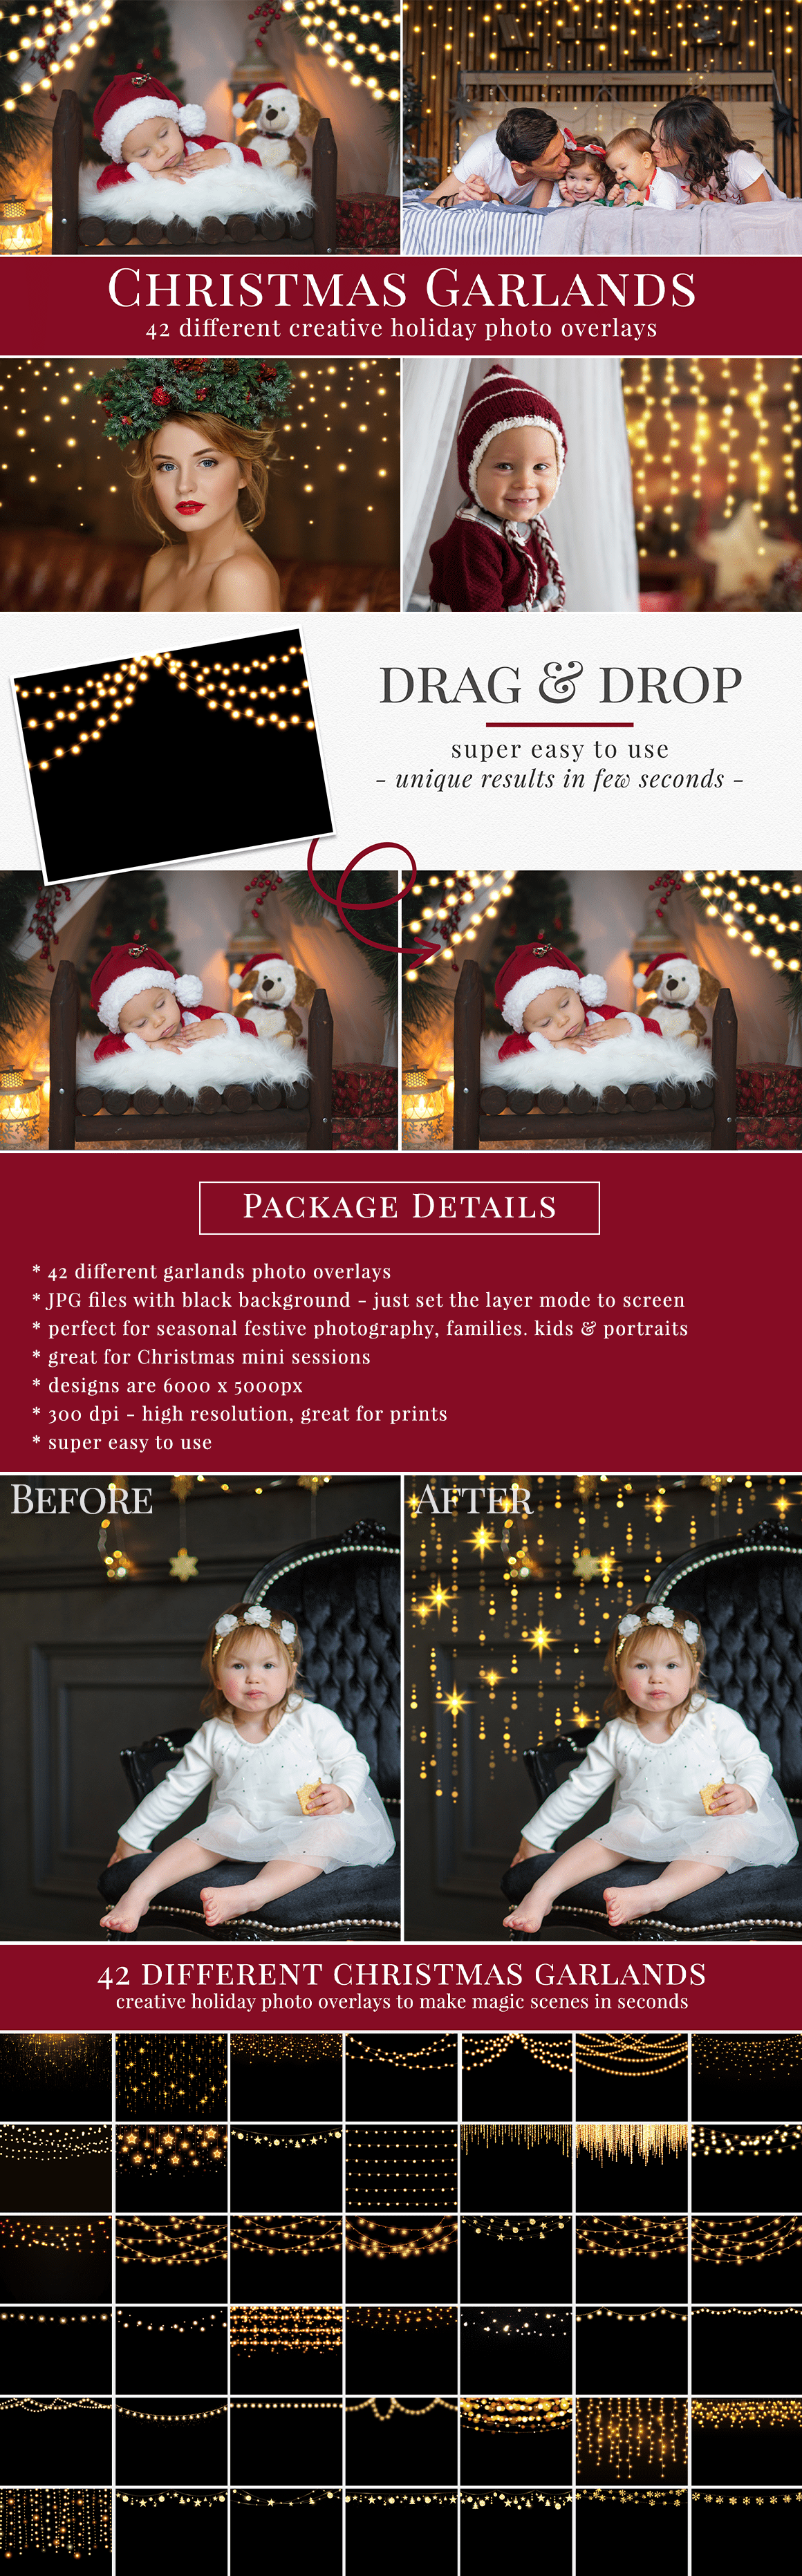 Enhance your holiday photography with our new collection of 42 different Christmas garlands photo overlays. Great for Christmas mini sessions with kids & families and portrait photography. Drag & drop - very easy to use, fast and simple. Original results just in few seconds. Professional Christmas photo overlays for Photoshop, Zoner, Gimp, PicMoneky, Canva, etc. Photo overlays for creative photographers from Brown Leopard.